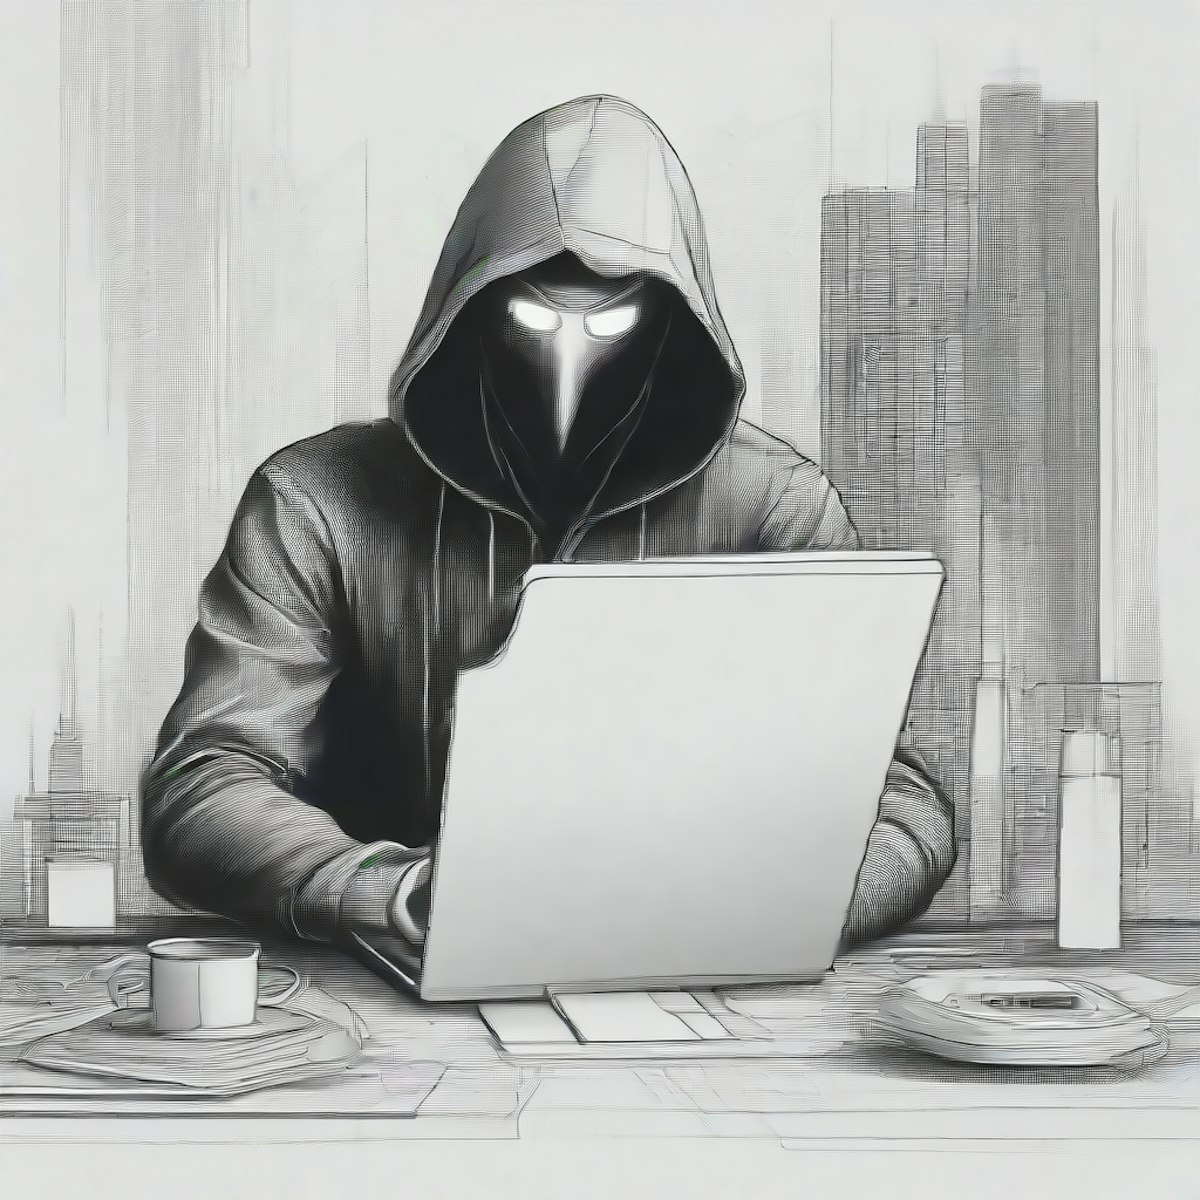 featured image - How Can You Hire a Hacker on the Dark Web?